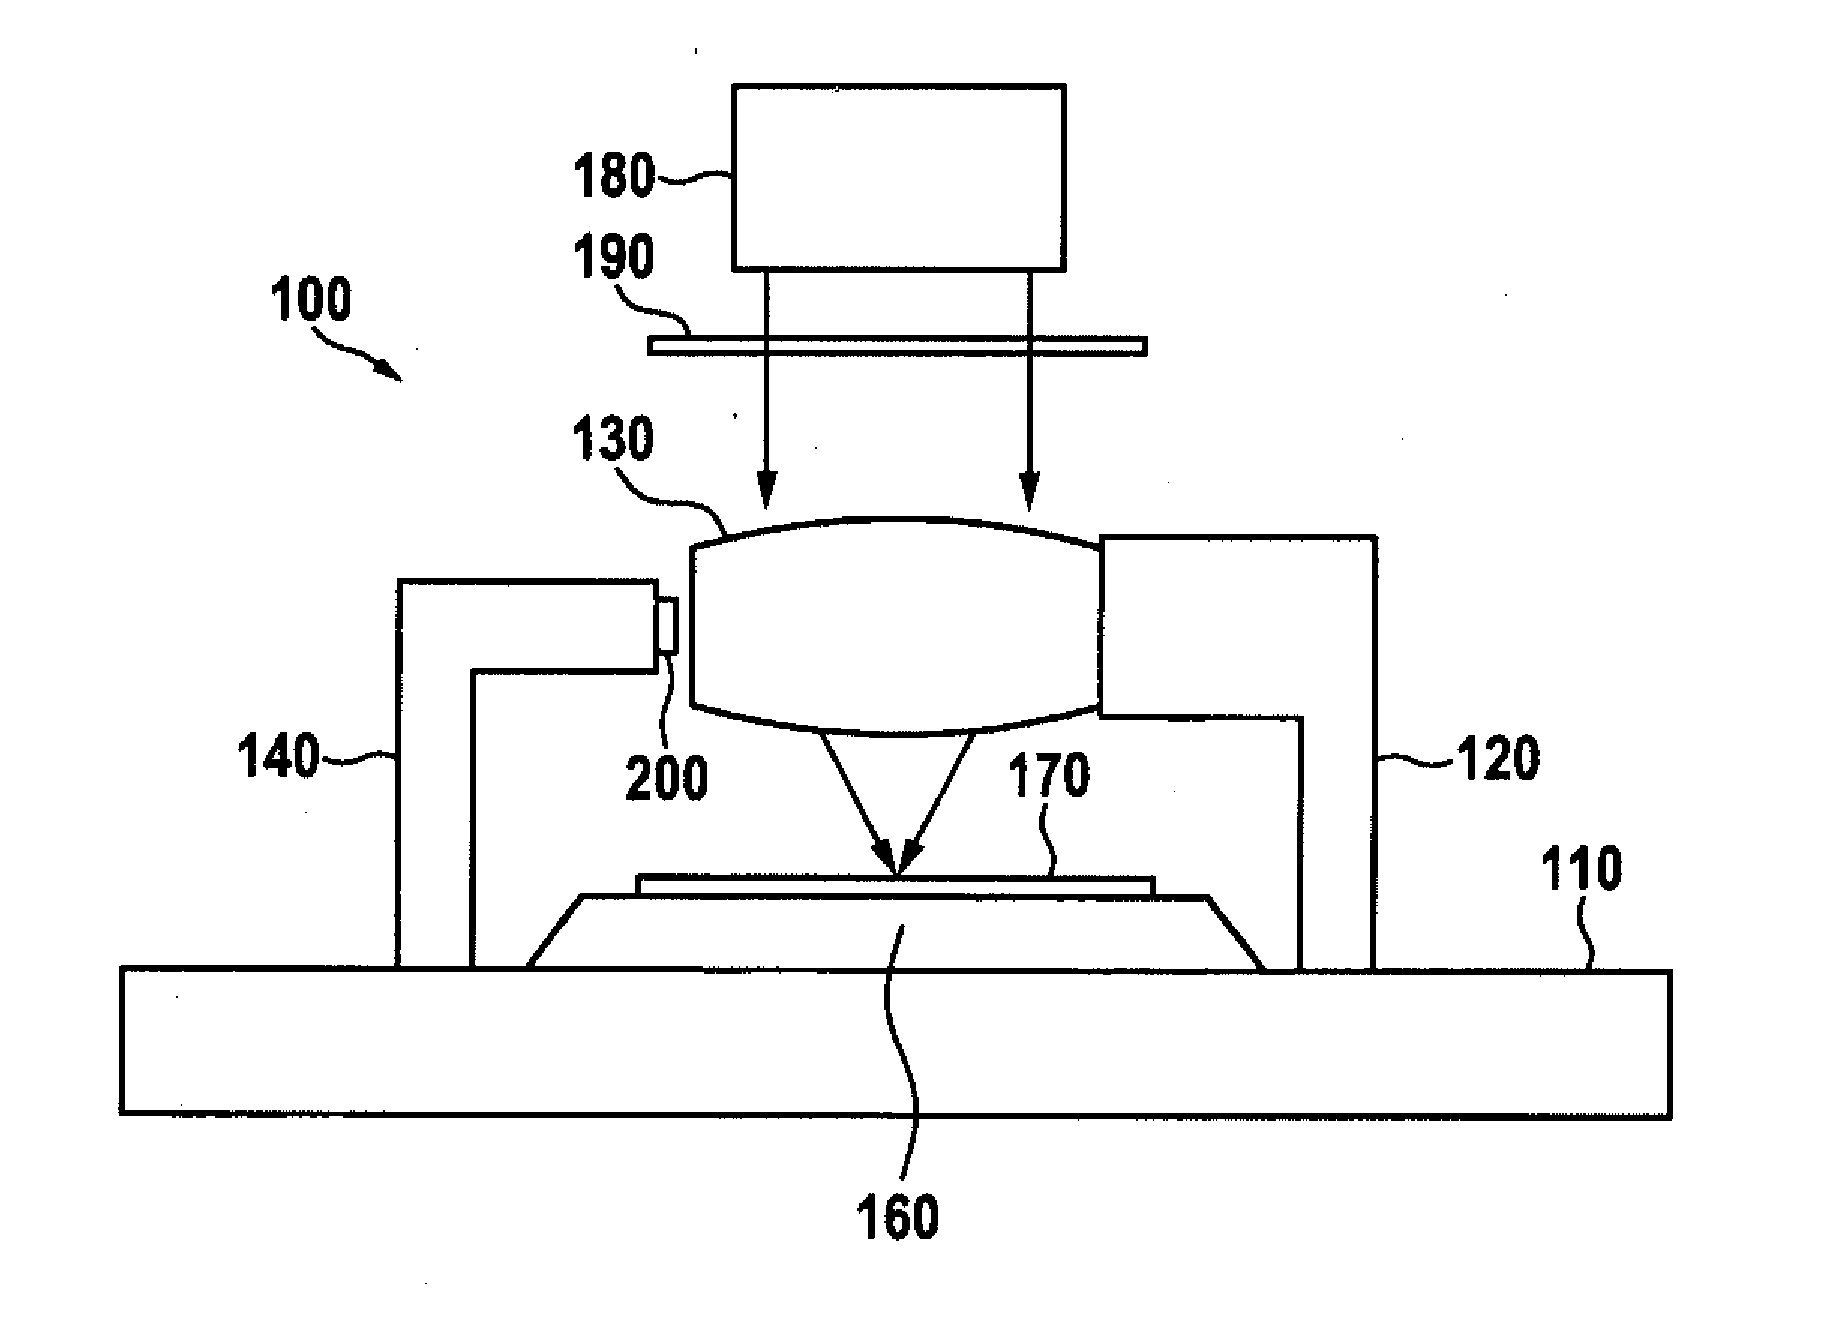 Lithography apparatus